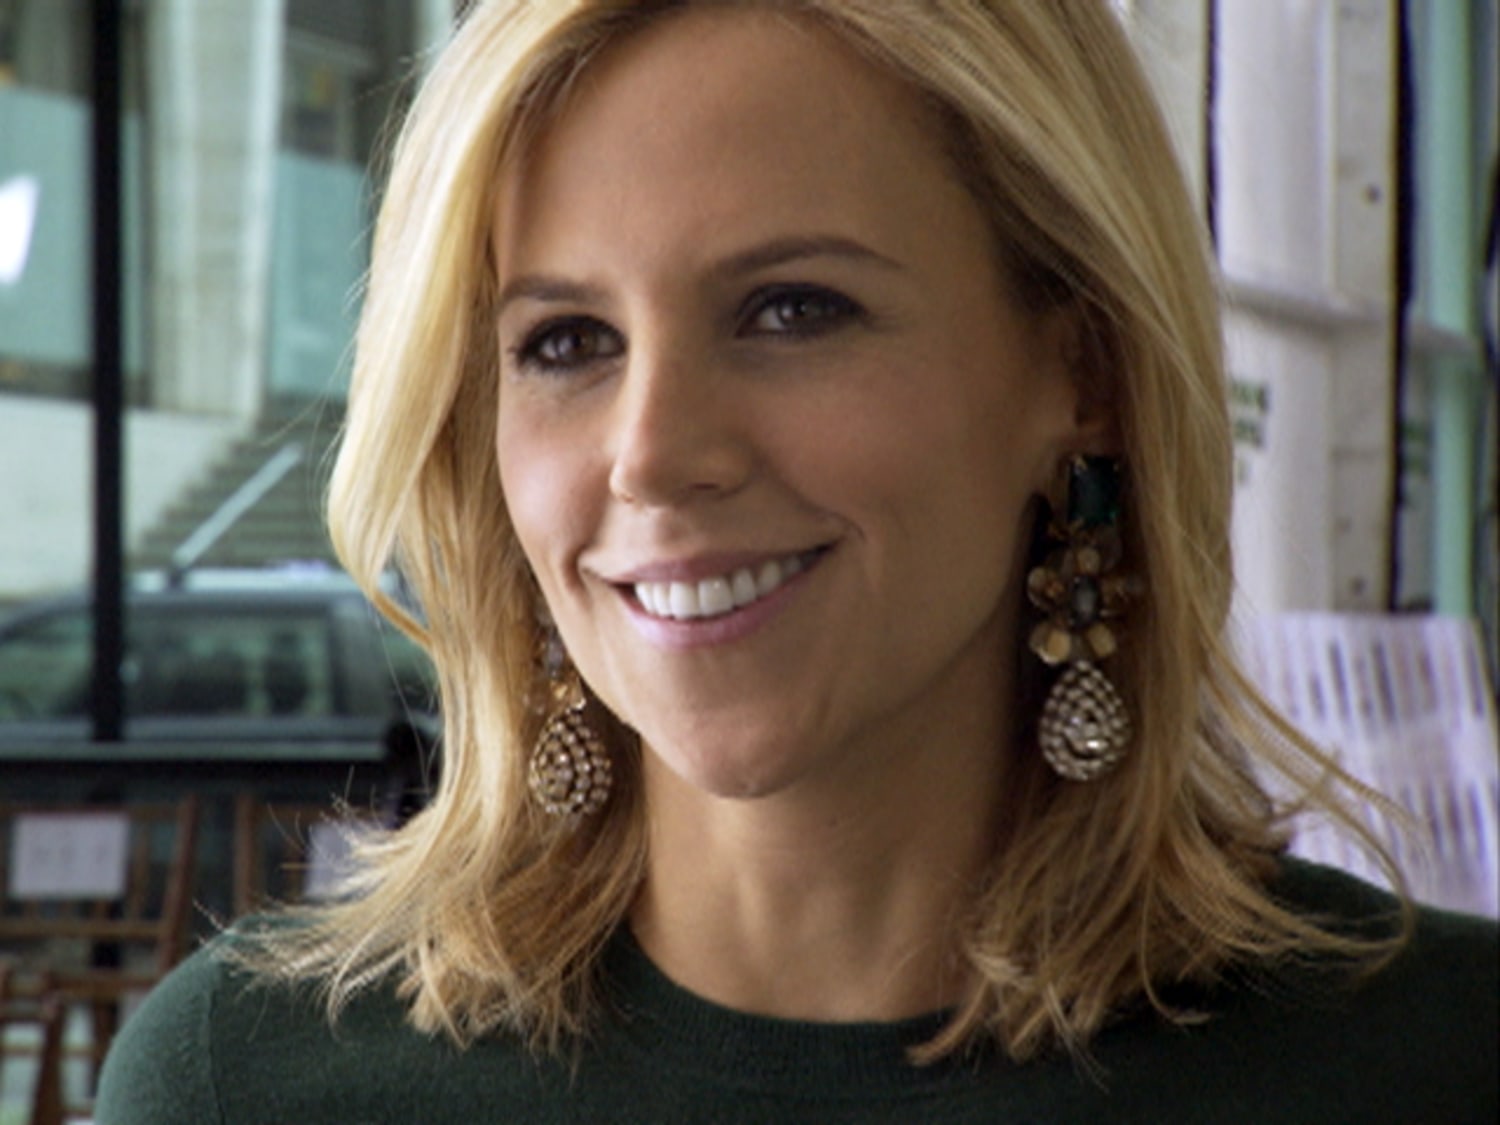 Tory Burch on designing what women want